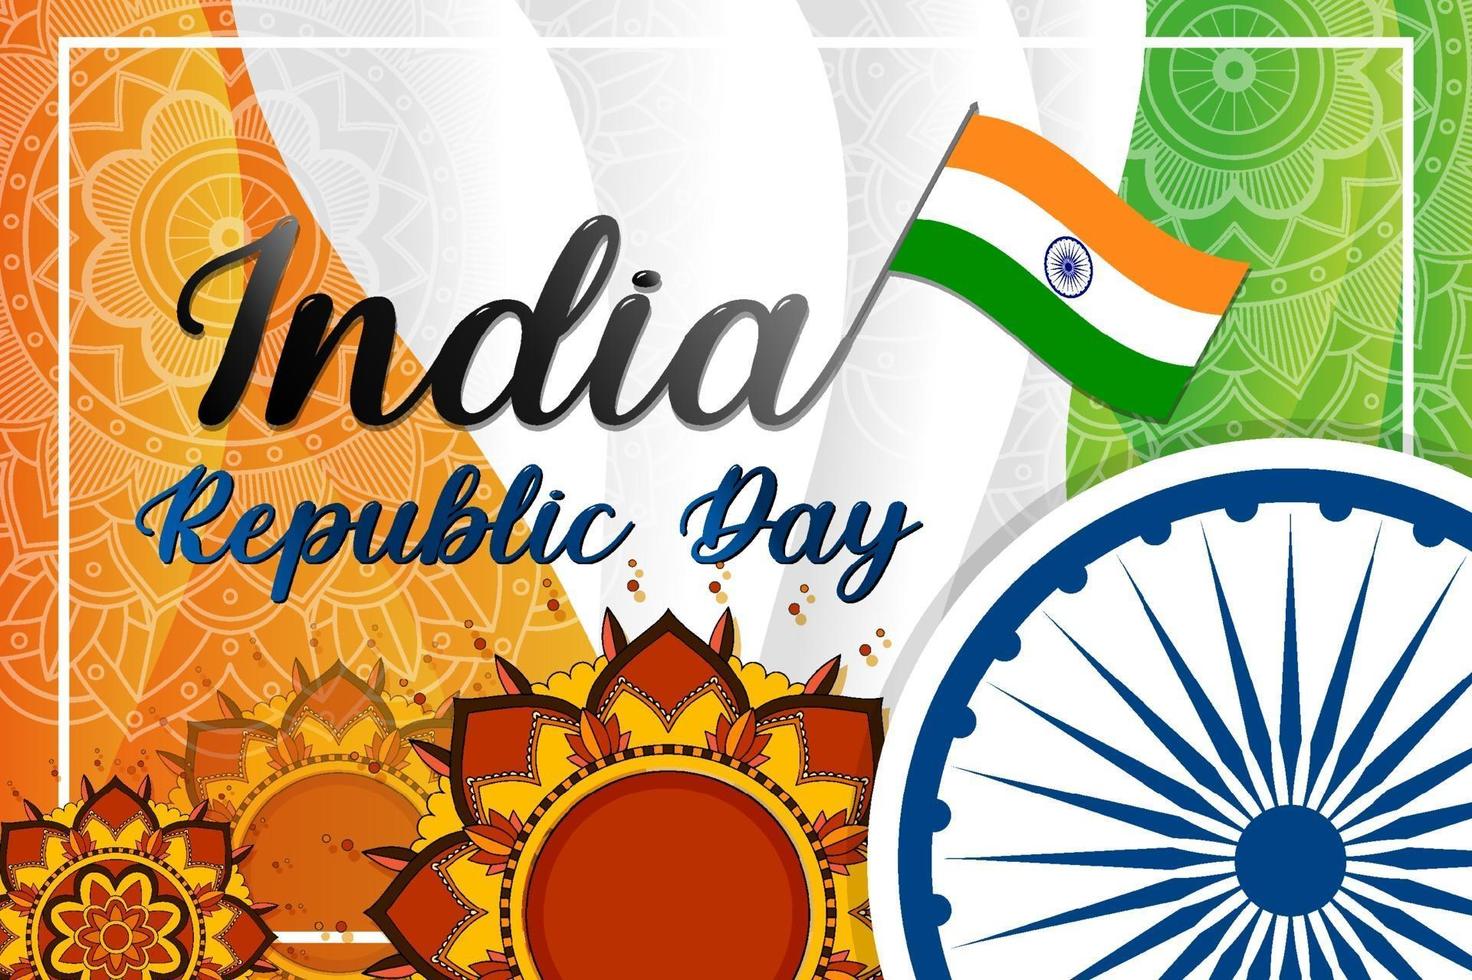 India Republic Day banner with kid characters vector